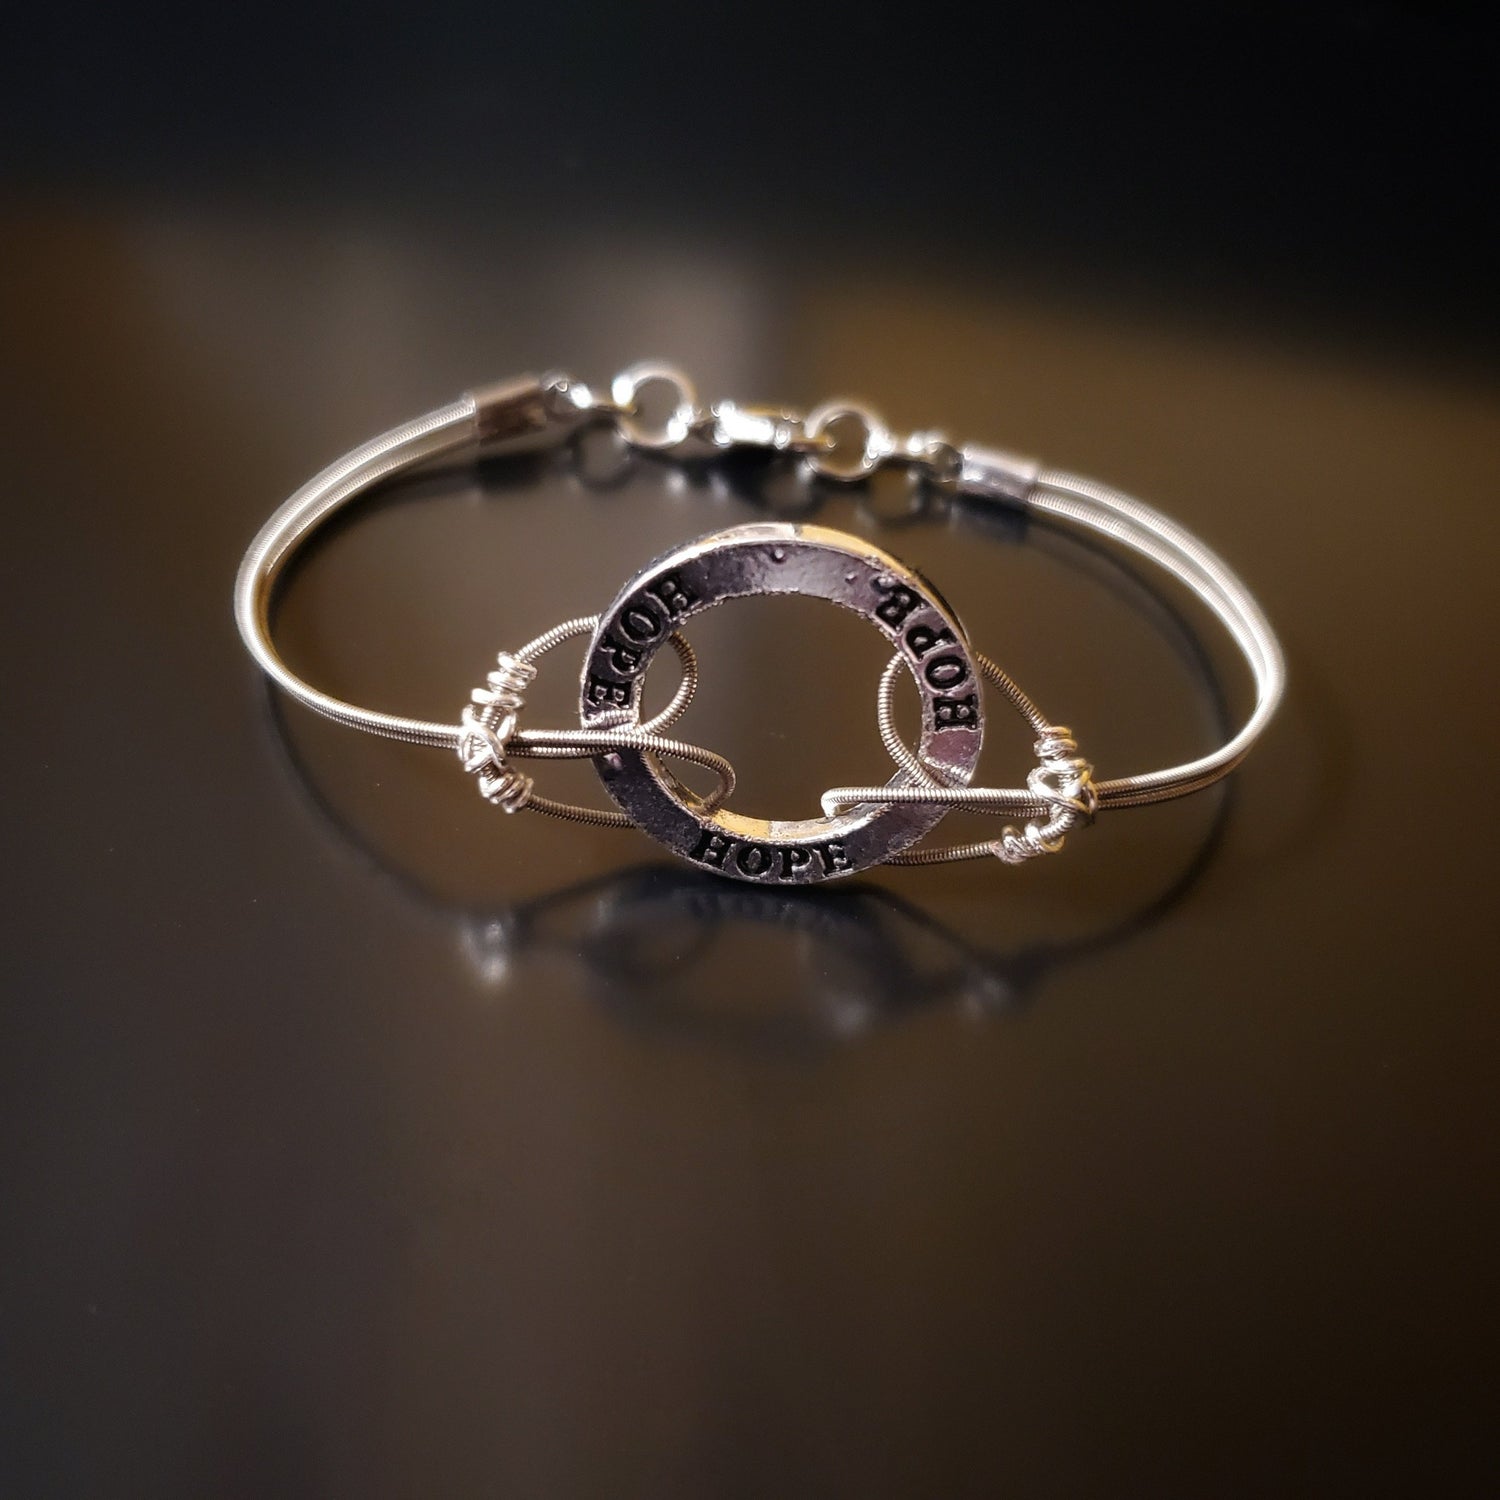 bracelet made from upcycled guitar strings connected to a silver hoop shaped charm with the word HOPE etched 3x on it